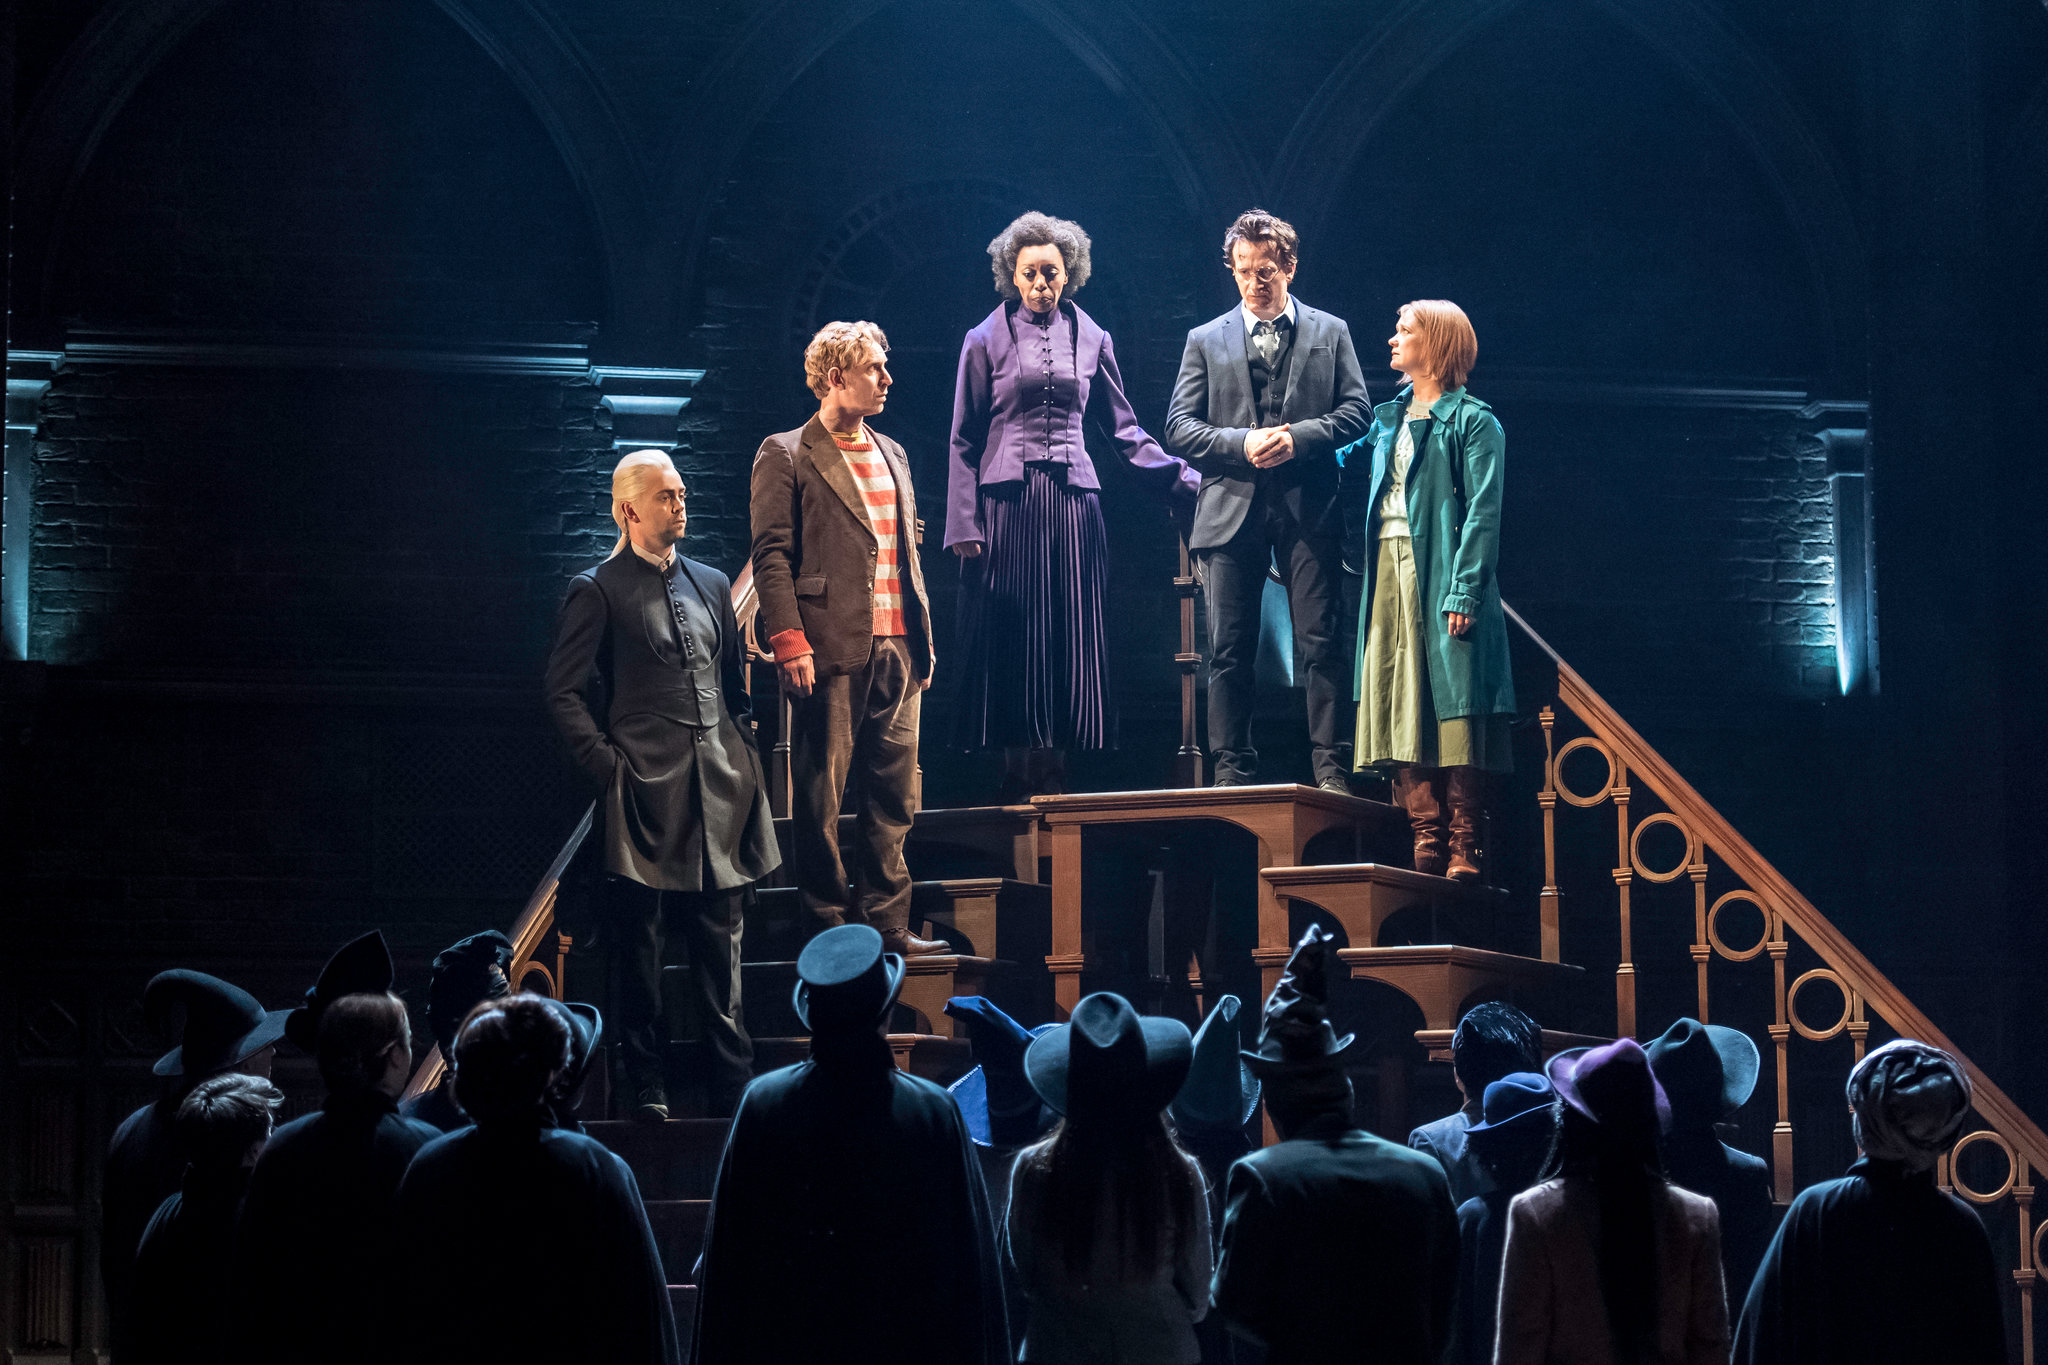 Harry Potter and The Cursed Child - Part 1 & 2 (11/5 7:30PM & 11/6 7:30PM) at Lyric Theatre